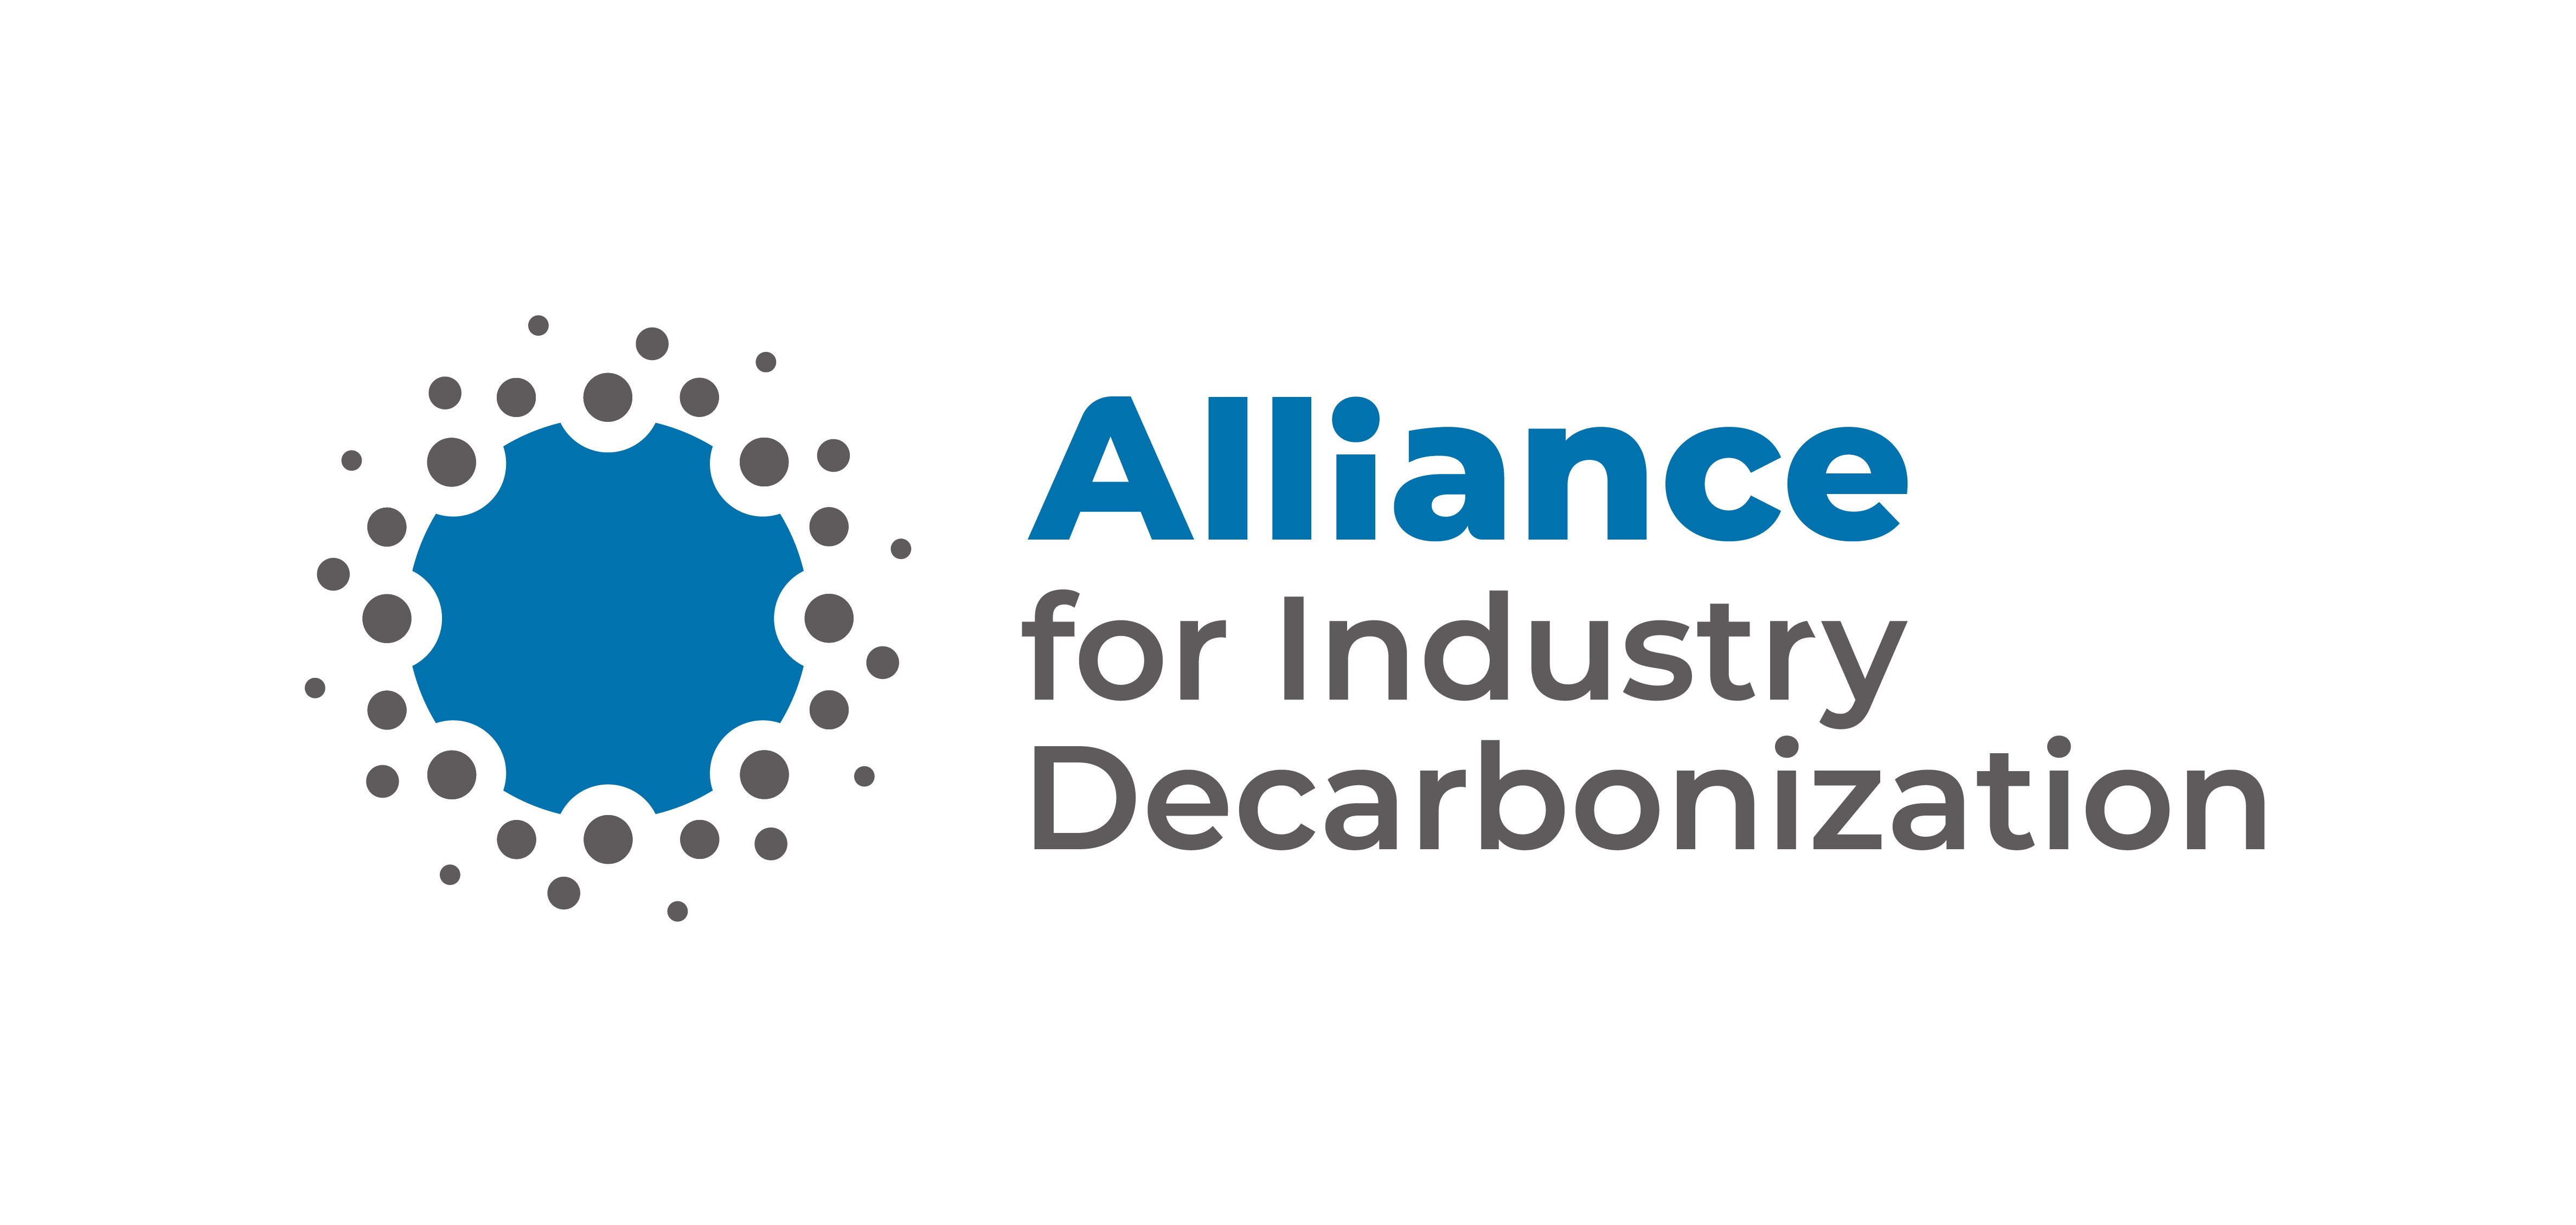 Alliance for Industry Decarbonization